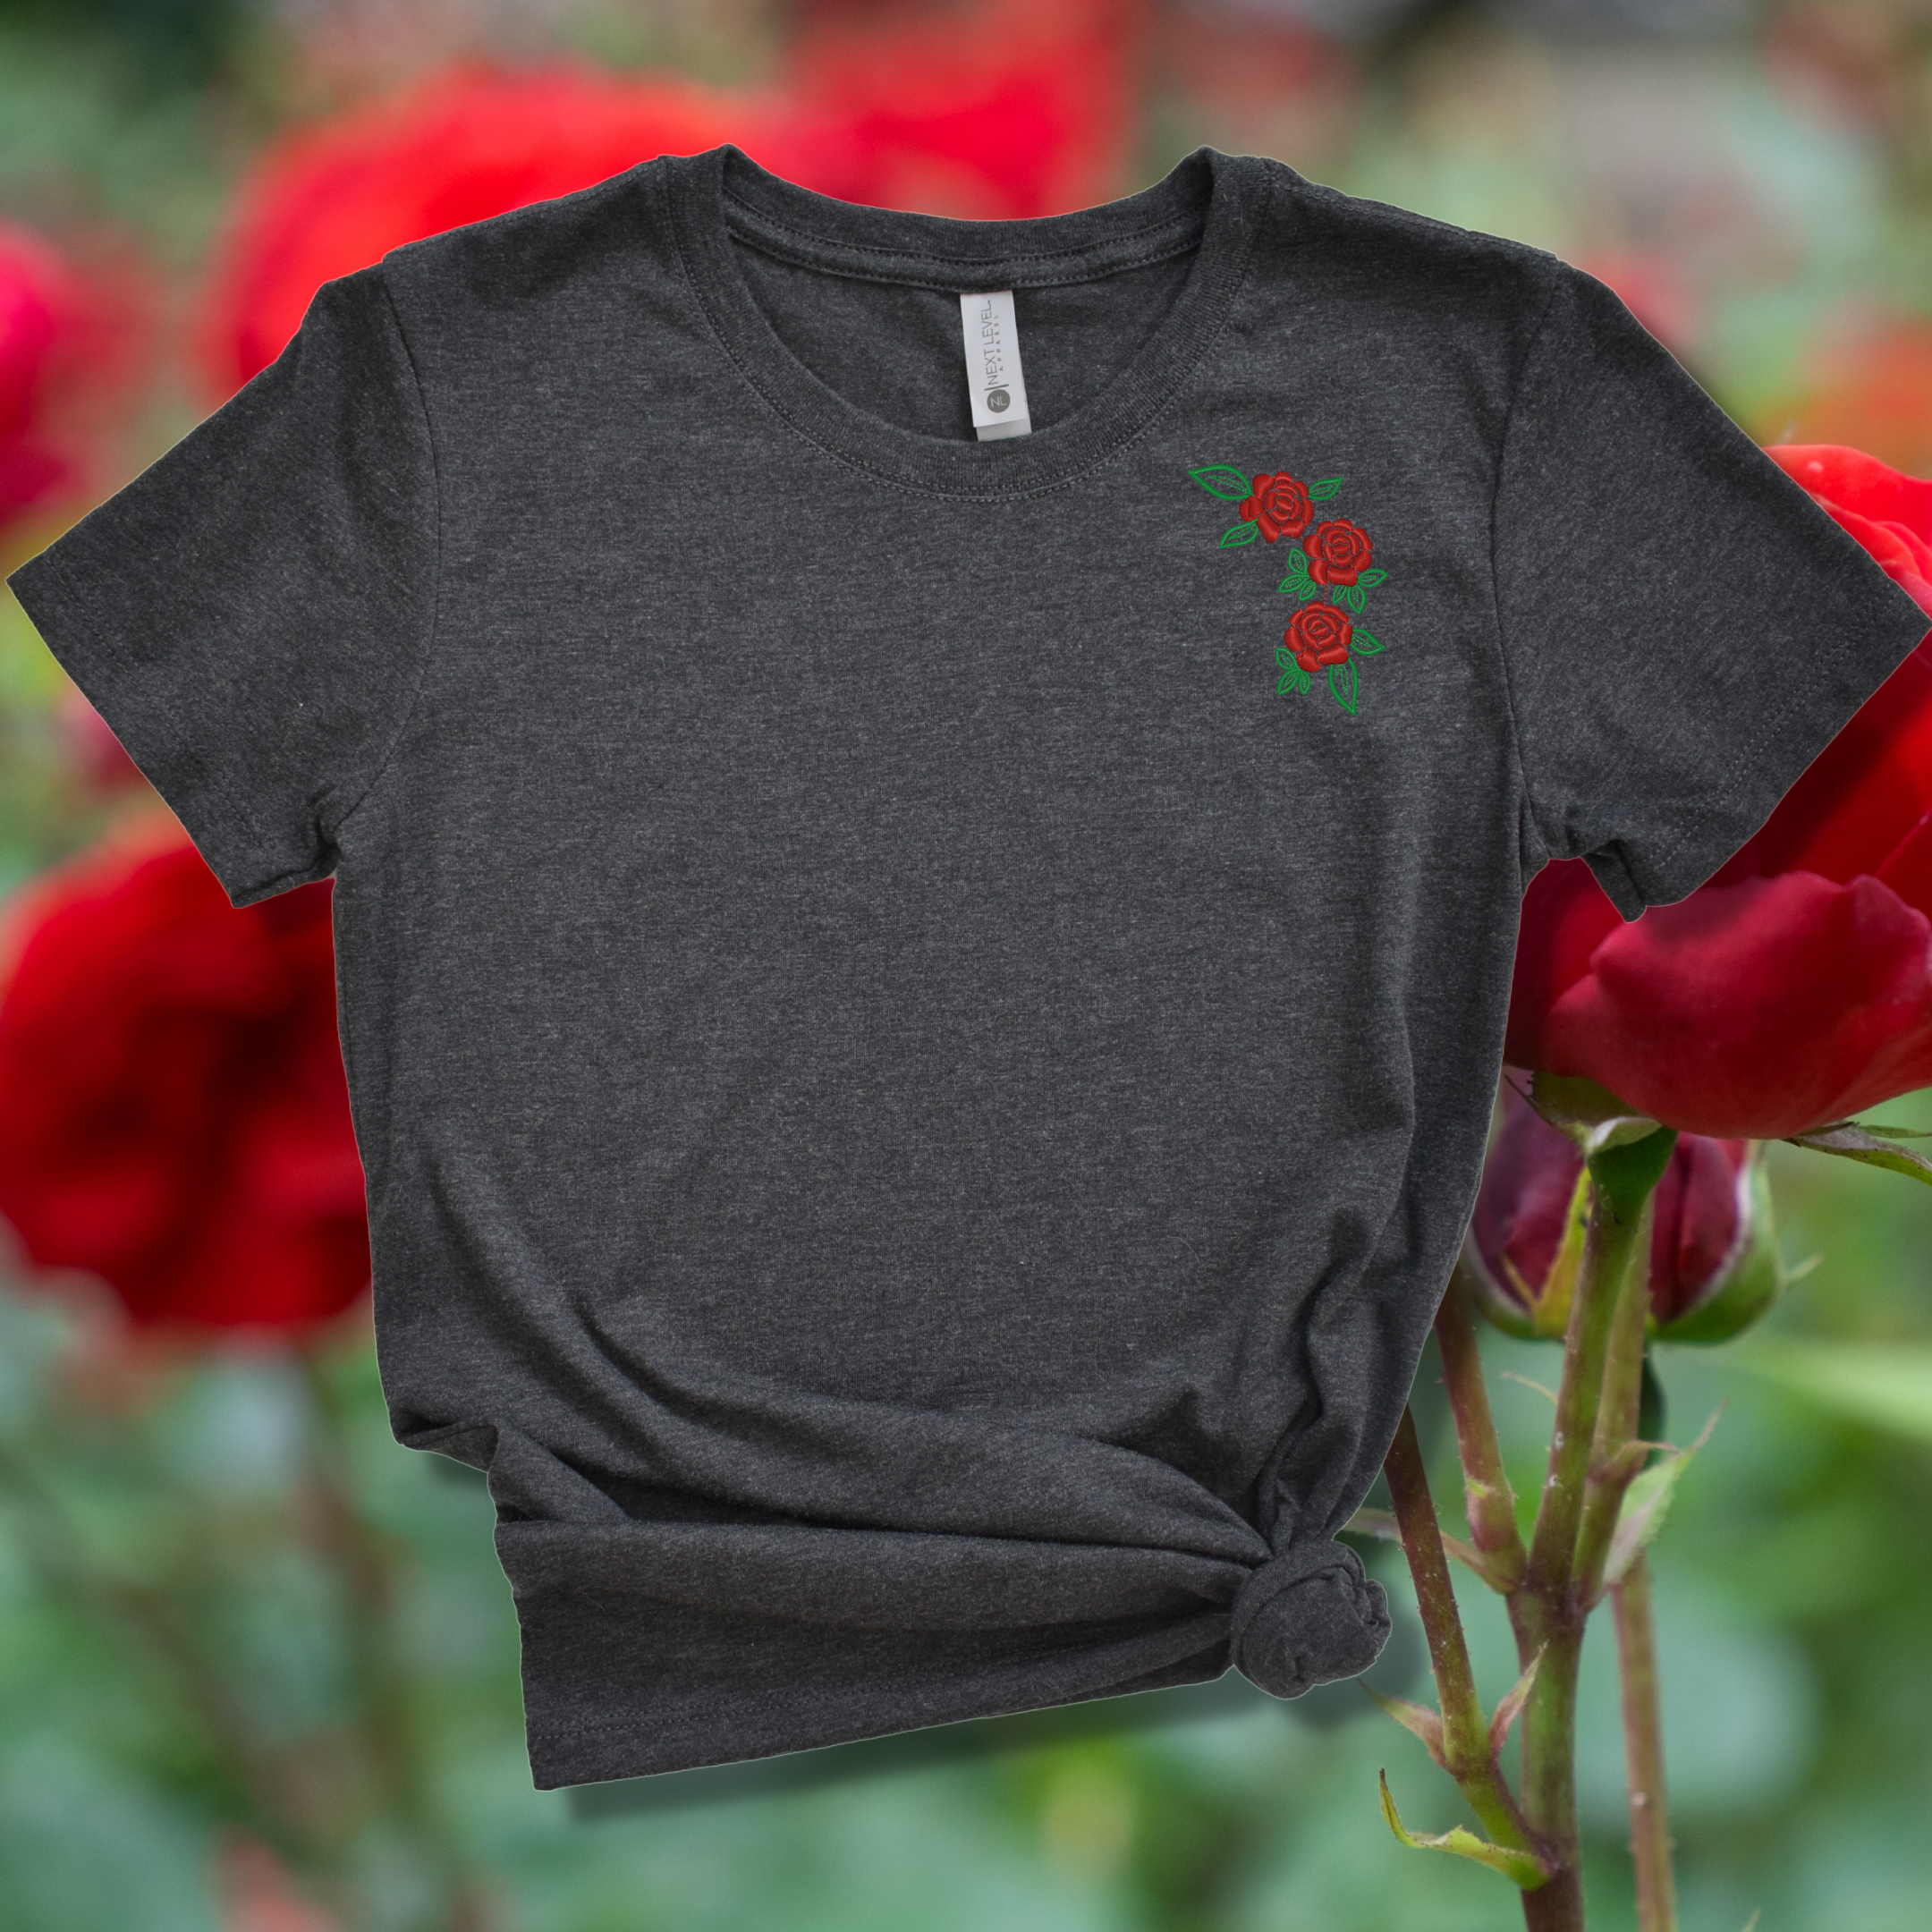 Rose Embroidered Tee Shirt, Unisex